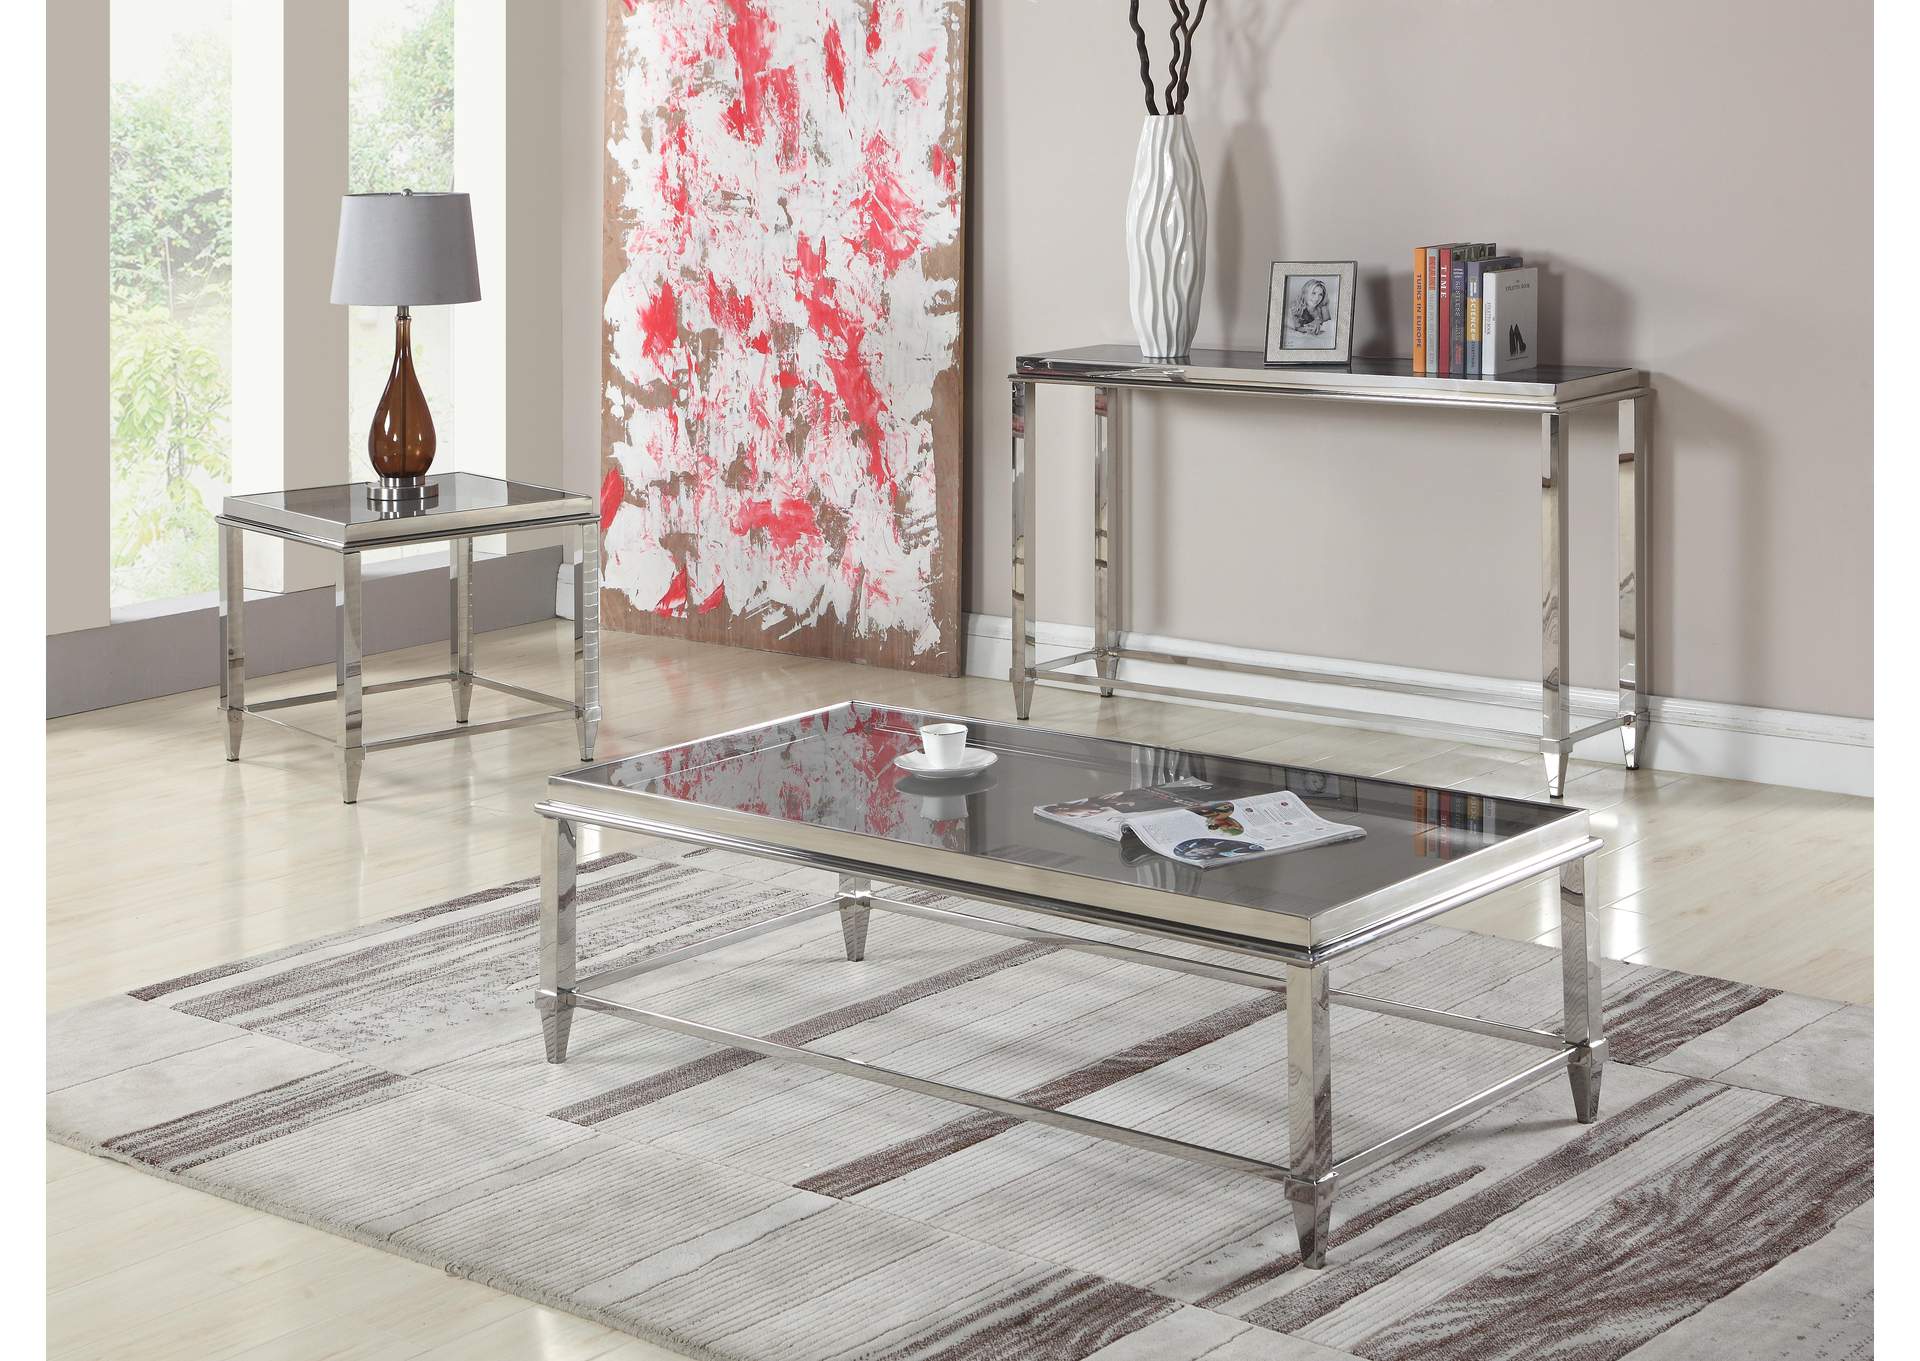 Polished SS Contemporary Rectangular Cocktail Table w/ Glass Top & Gray Trim,Chintaly Imports